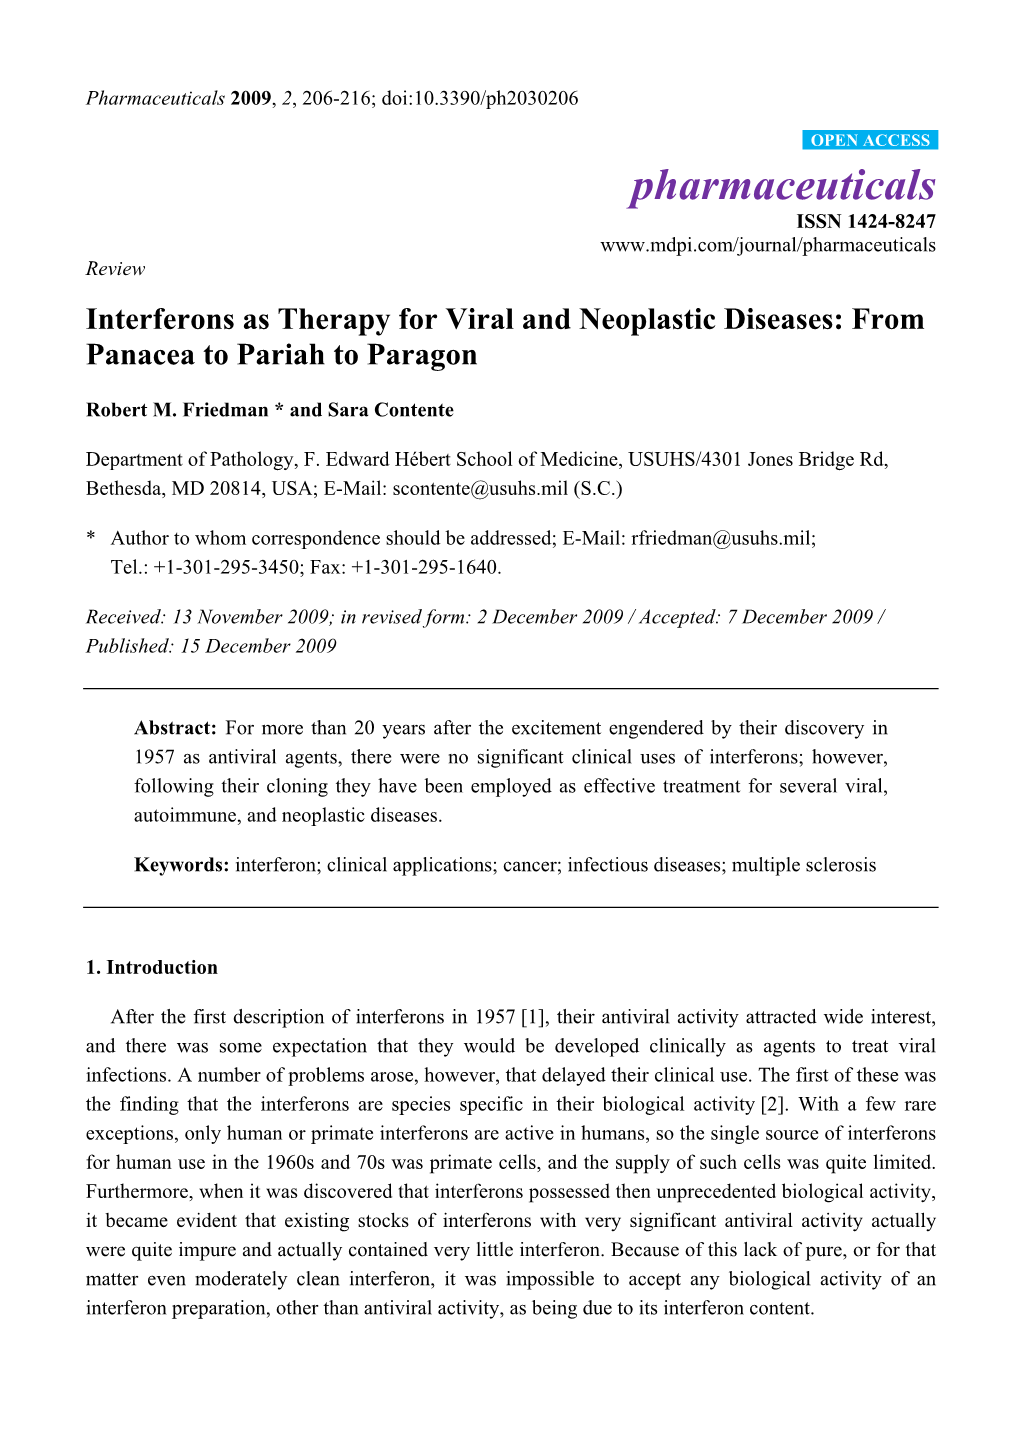 Interferons As Therapy for Viral and Neoplastic Diseases: from Panacea to Pariah to Paragon